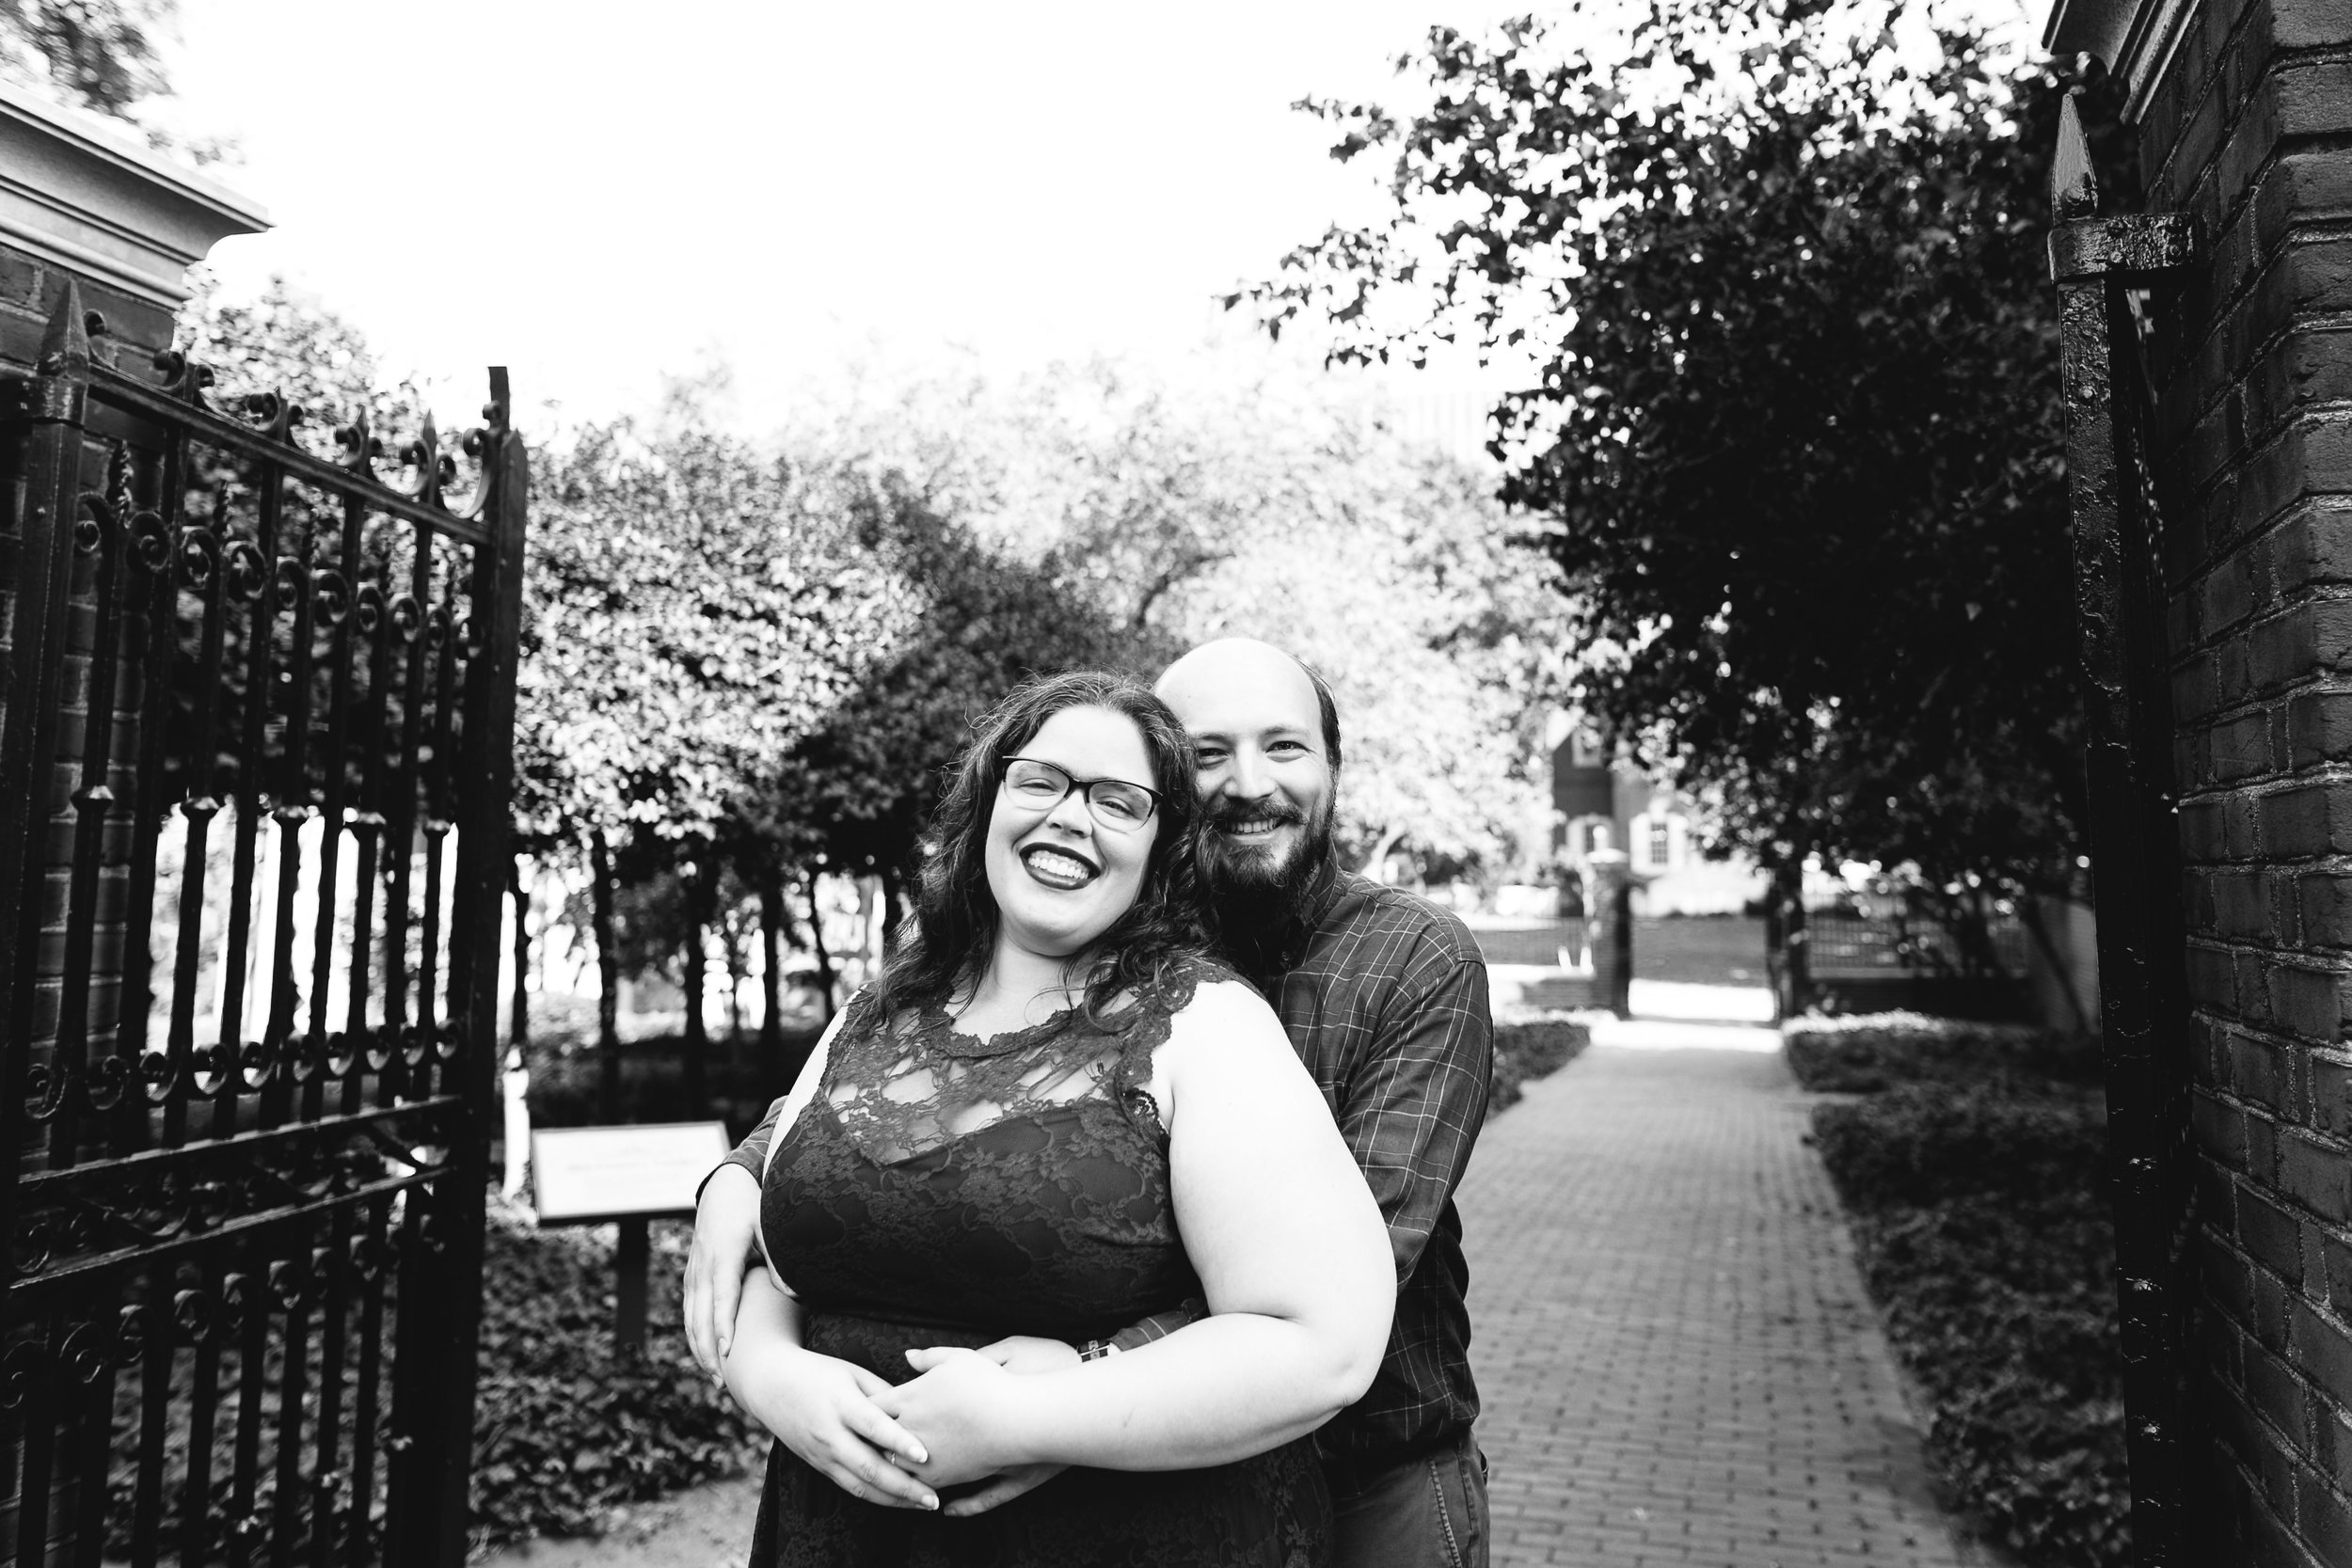 D&A Old City Philly Couples Session Photo Location Ideas 7.jpg